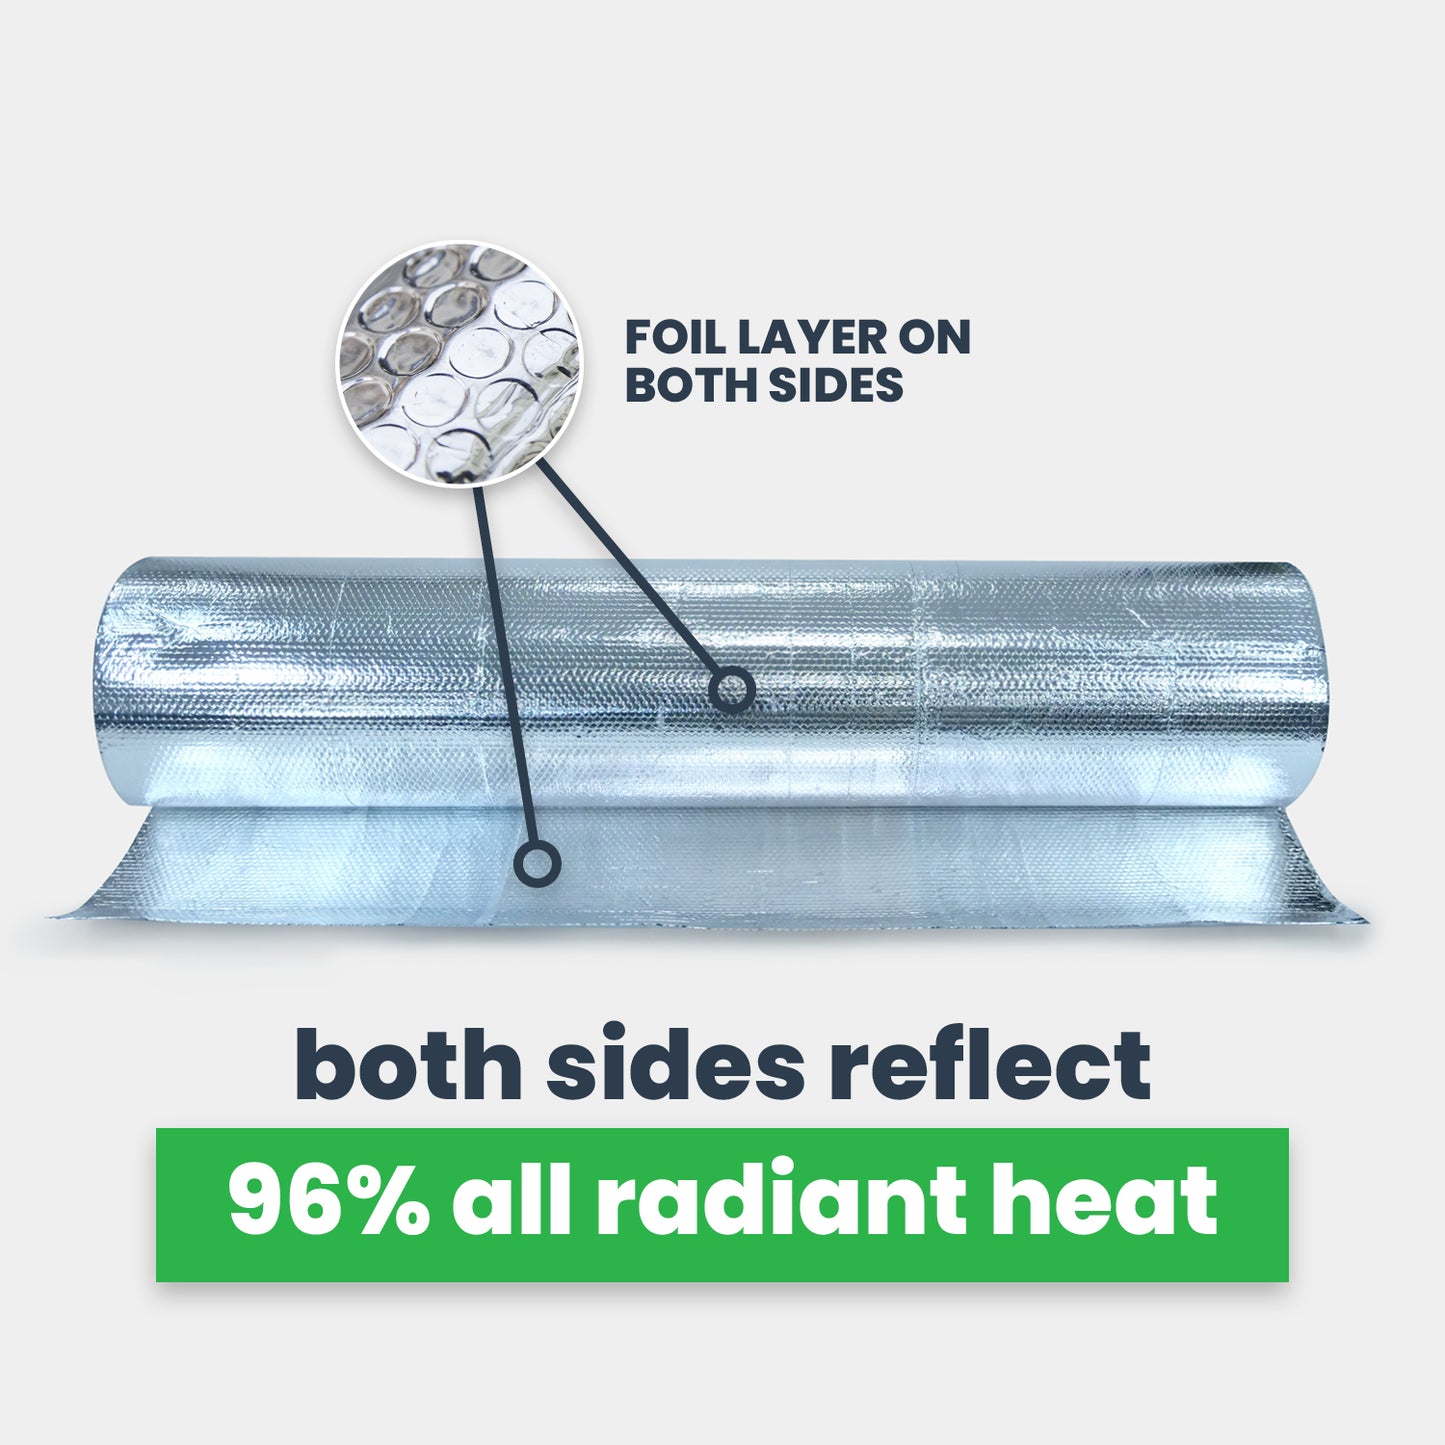 Double Bubble Insulation, foil layers reflect 96% of radiant heat